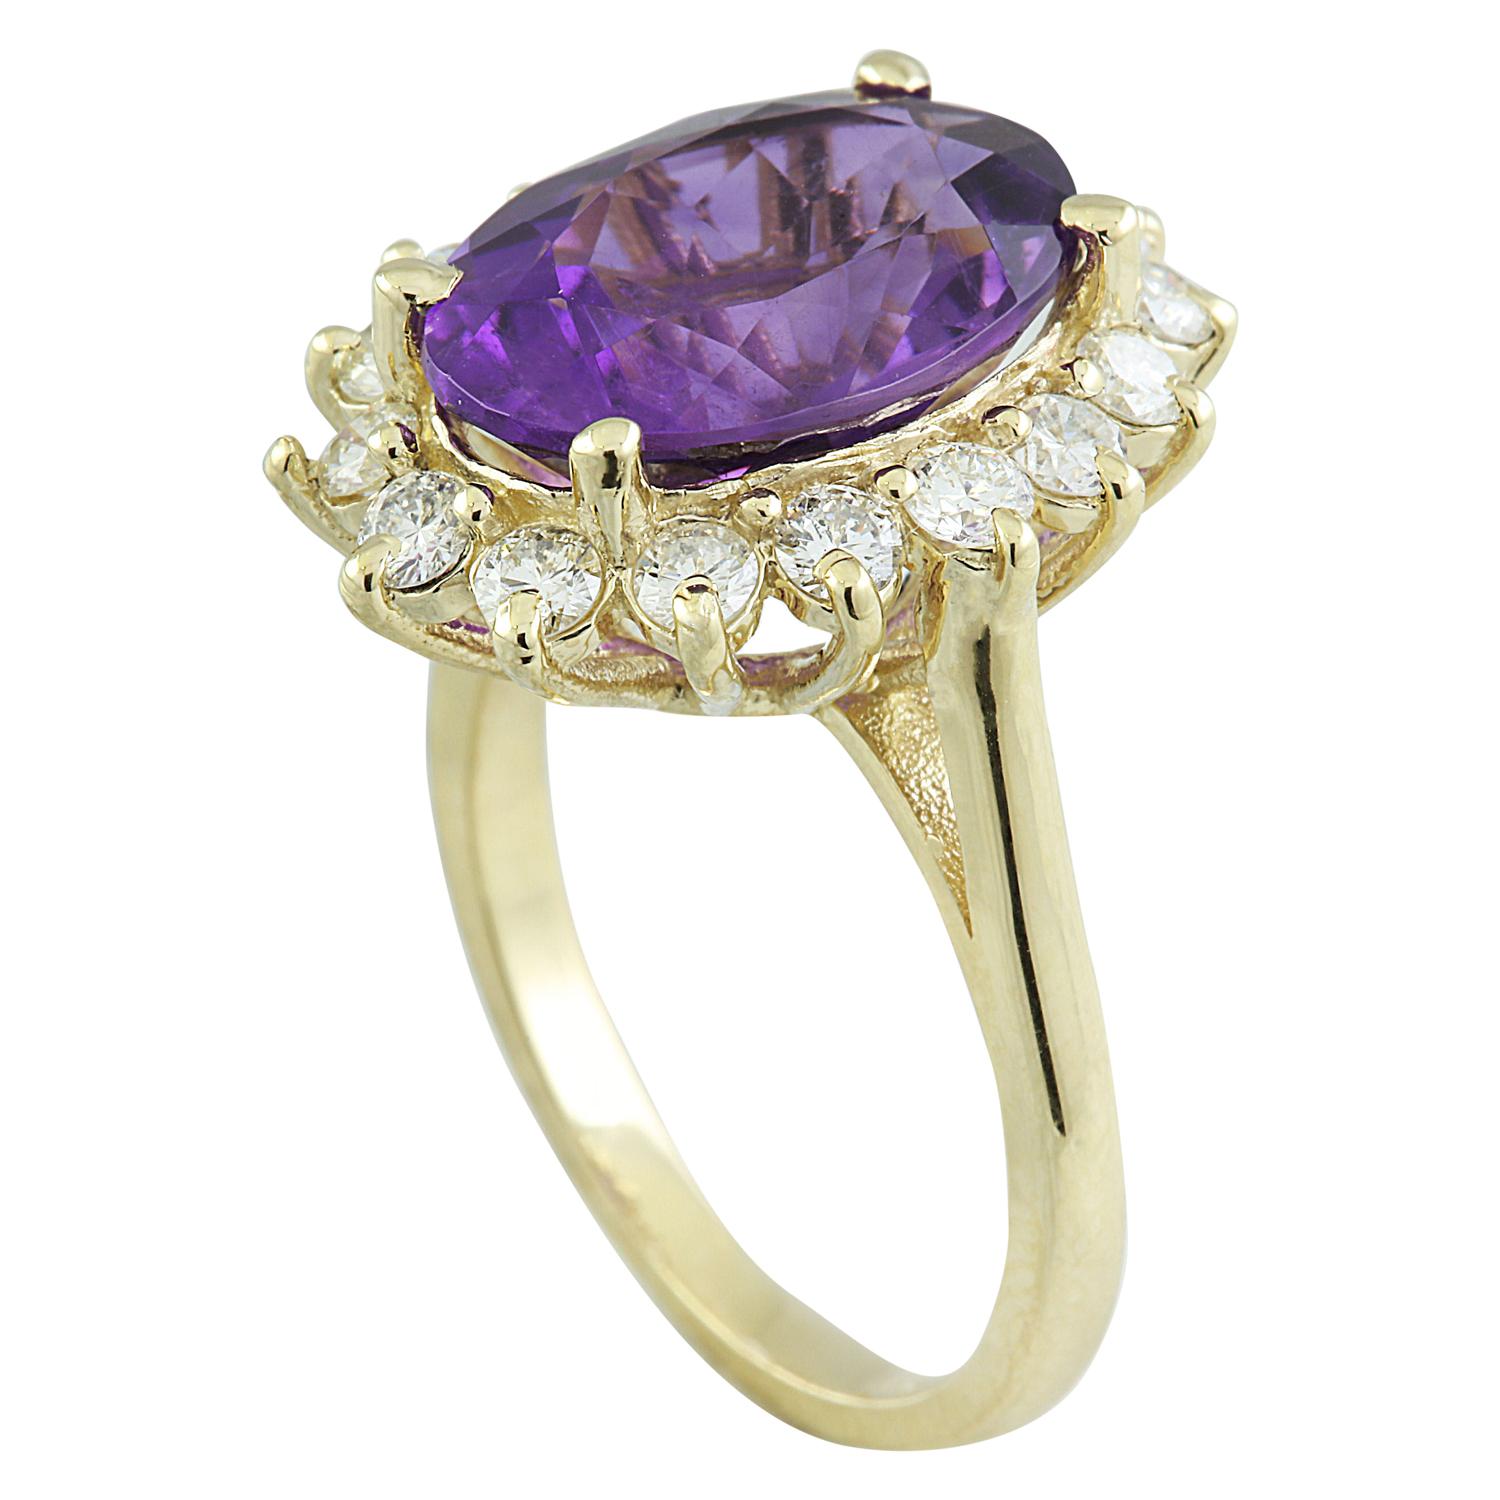 7.26 Carat Natural Amethyst 14 Karat Solid Yellow Gold Diamond Ring
Stamped: 14K 
Total Ring Weight: 6 Grams 
Amethyst Weight: 6.11 Carat (14.00x10.00 Millimeters) 
Diamond Weight: 1.15 Carat (F-G Color, VS2-SI1 Clarity )
Face Measures: 19.05x16.80